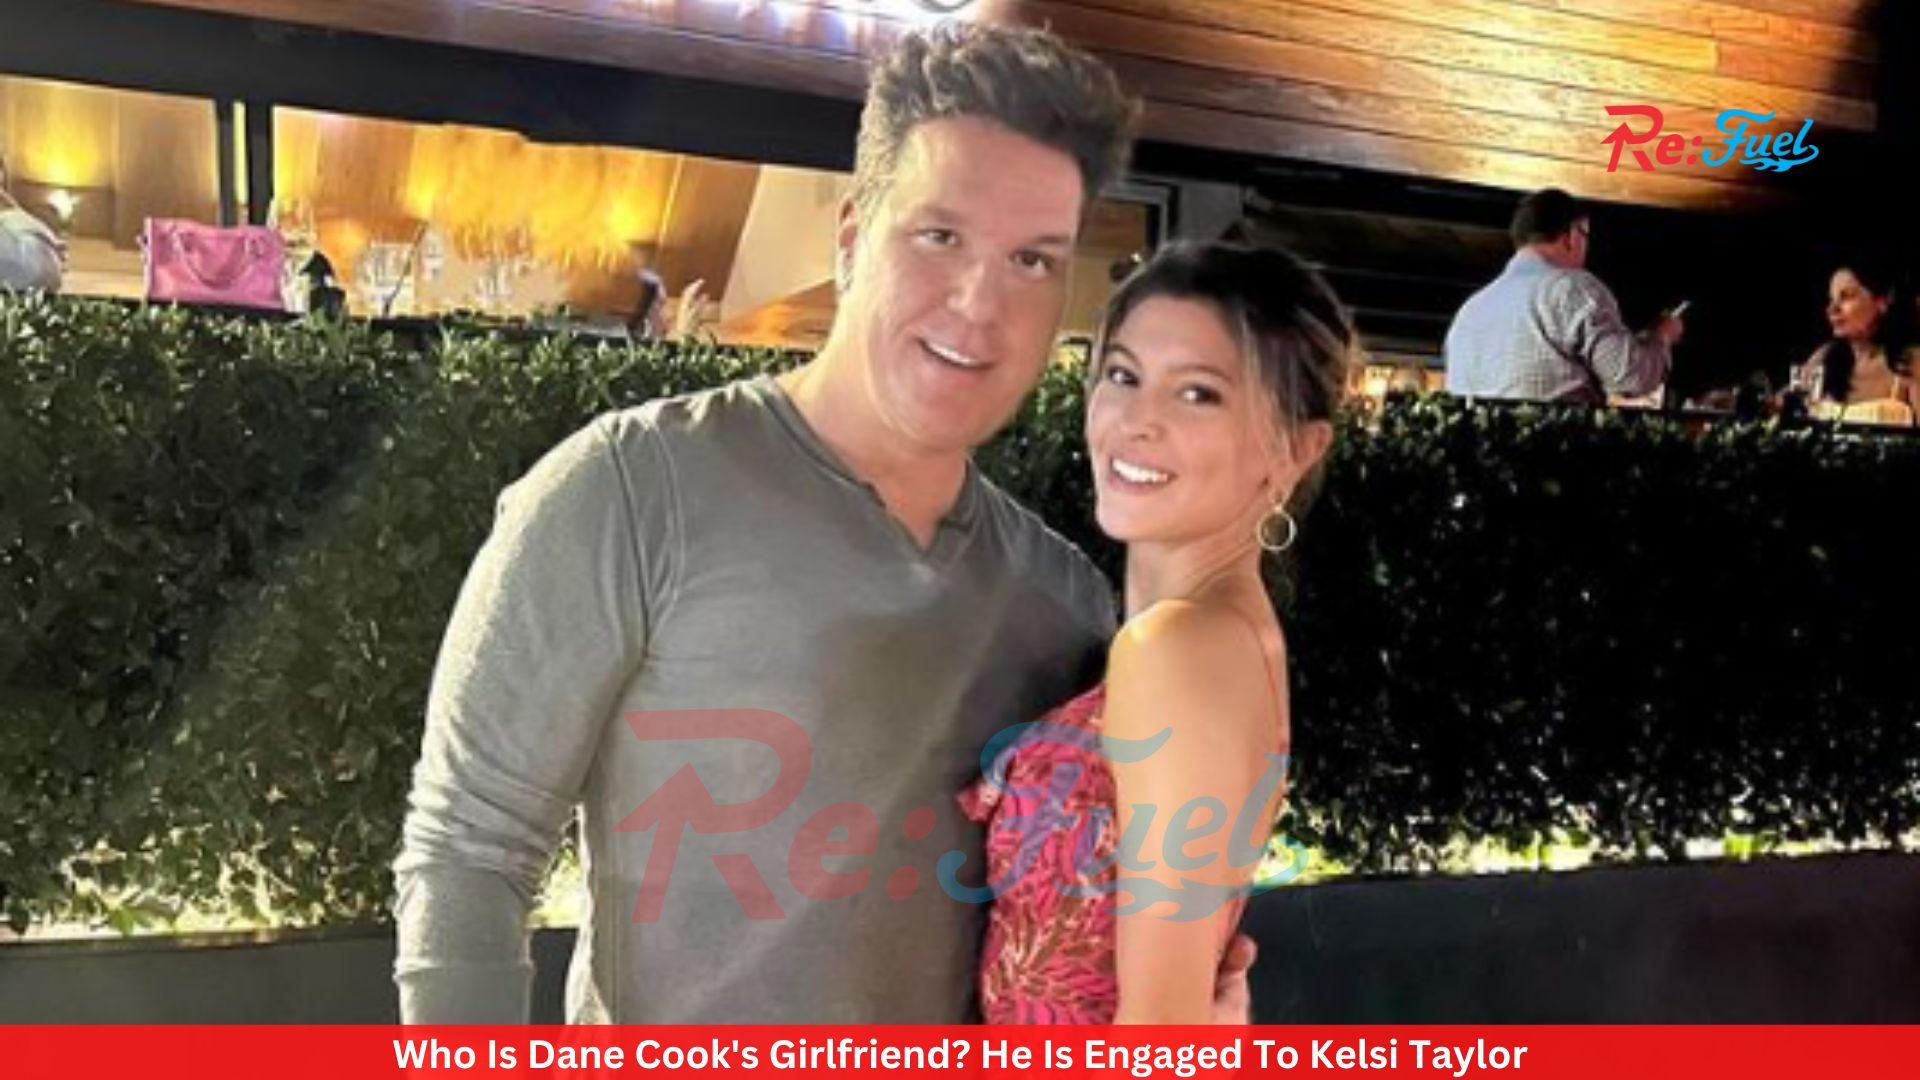 Who Is Dane Cook's Girlfriend? He Is Engaged To Kelsi Taylor